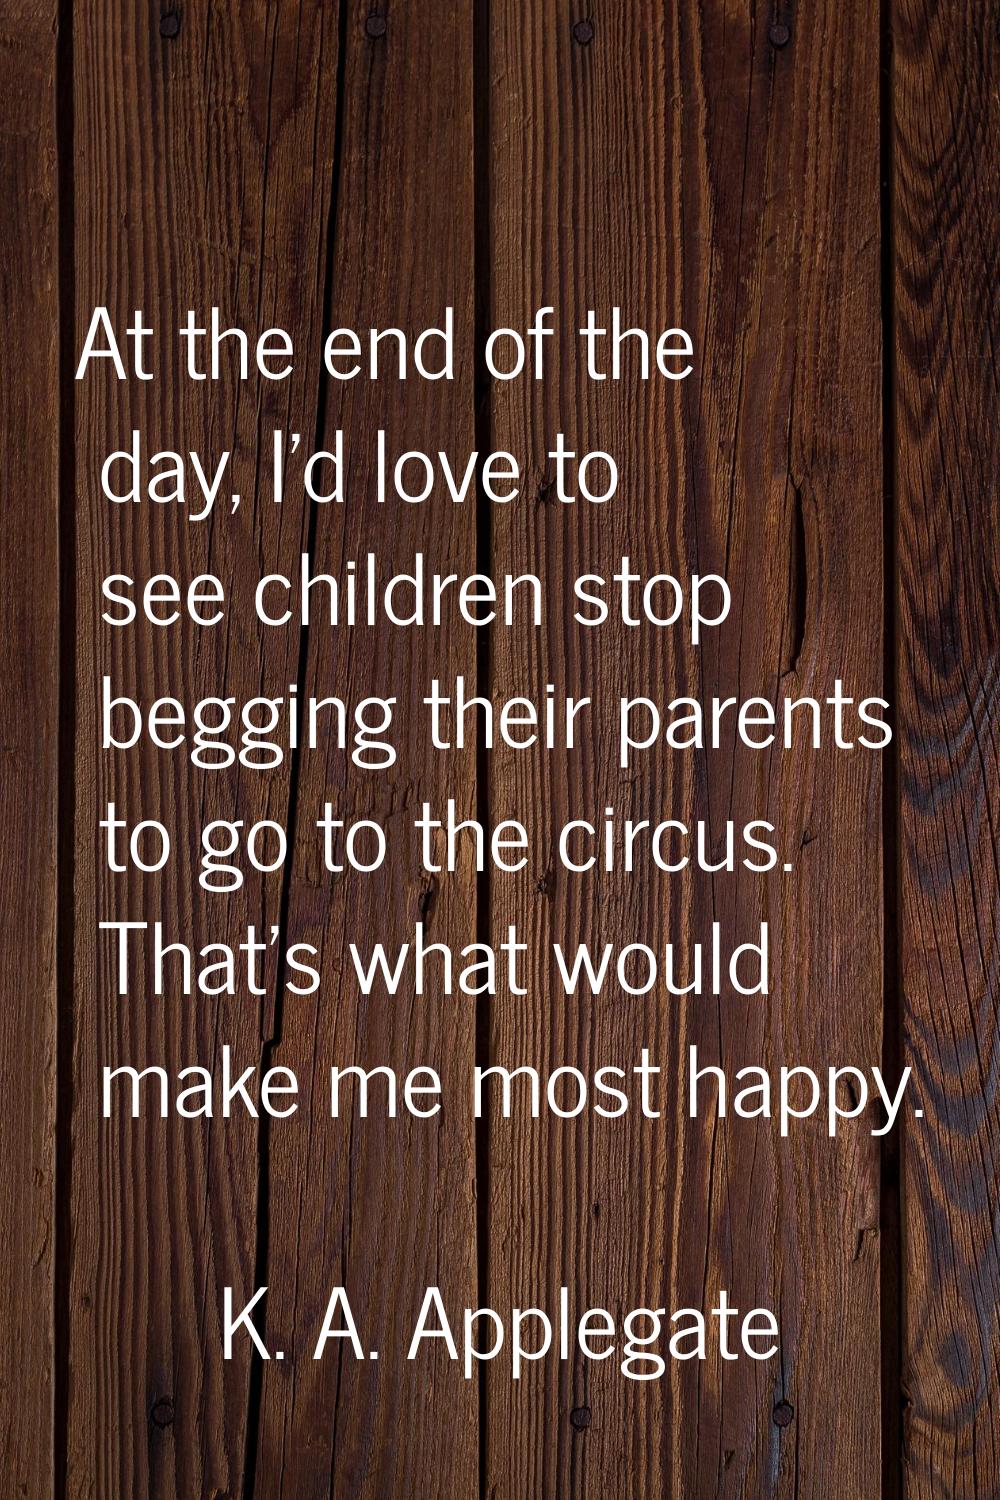 At the end of the day, I'd love to see children stop begging their parents to go to the circus. Tha